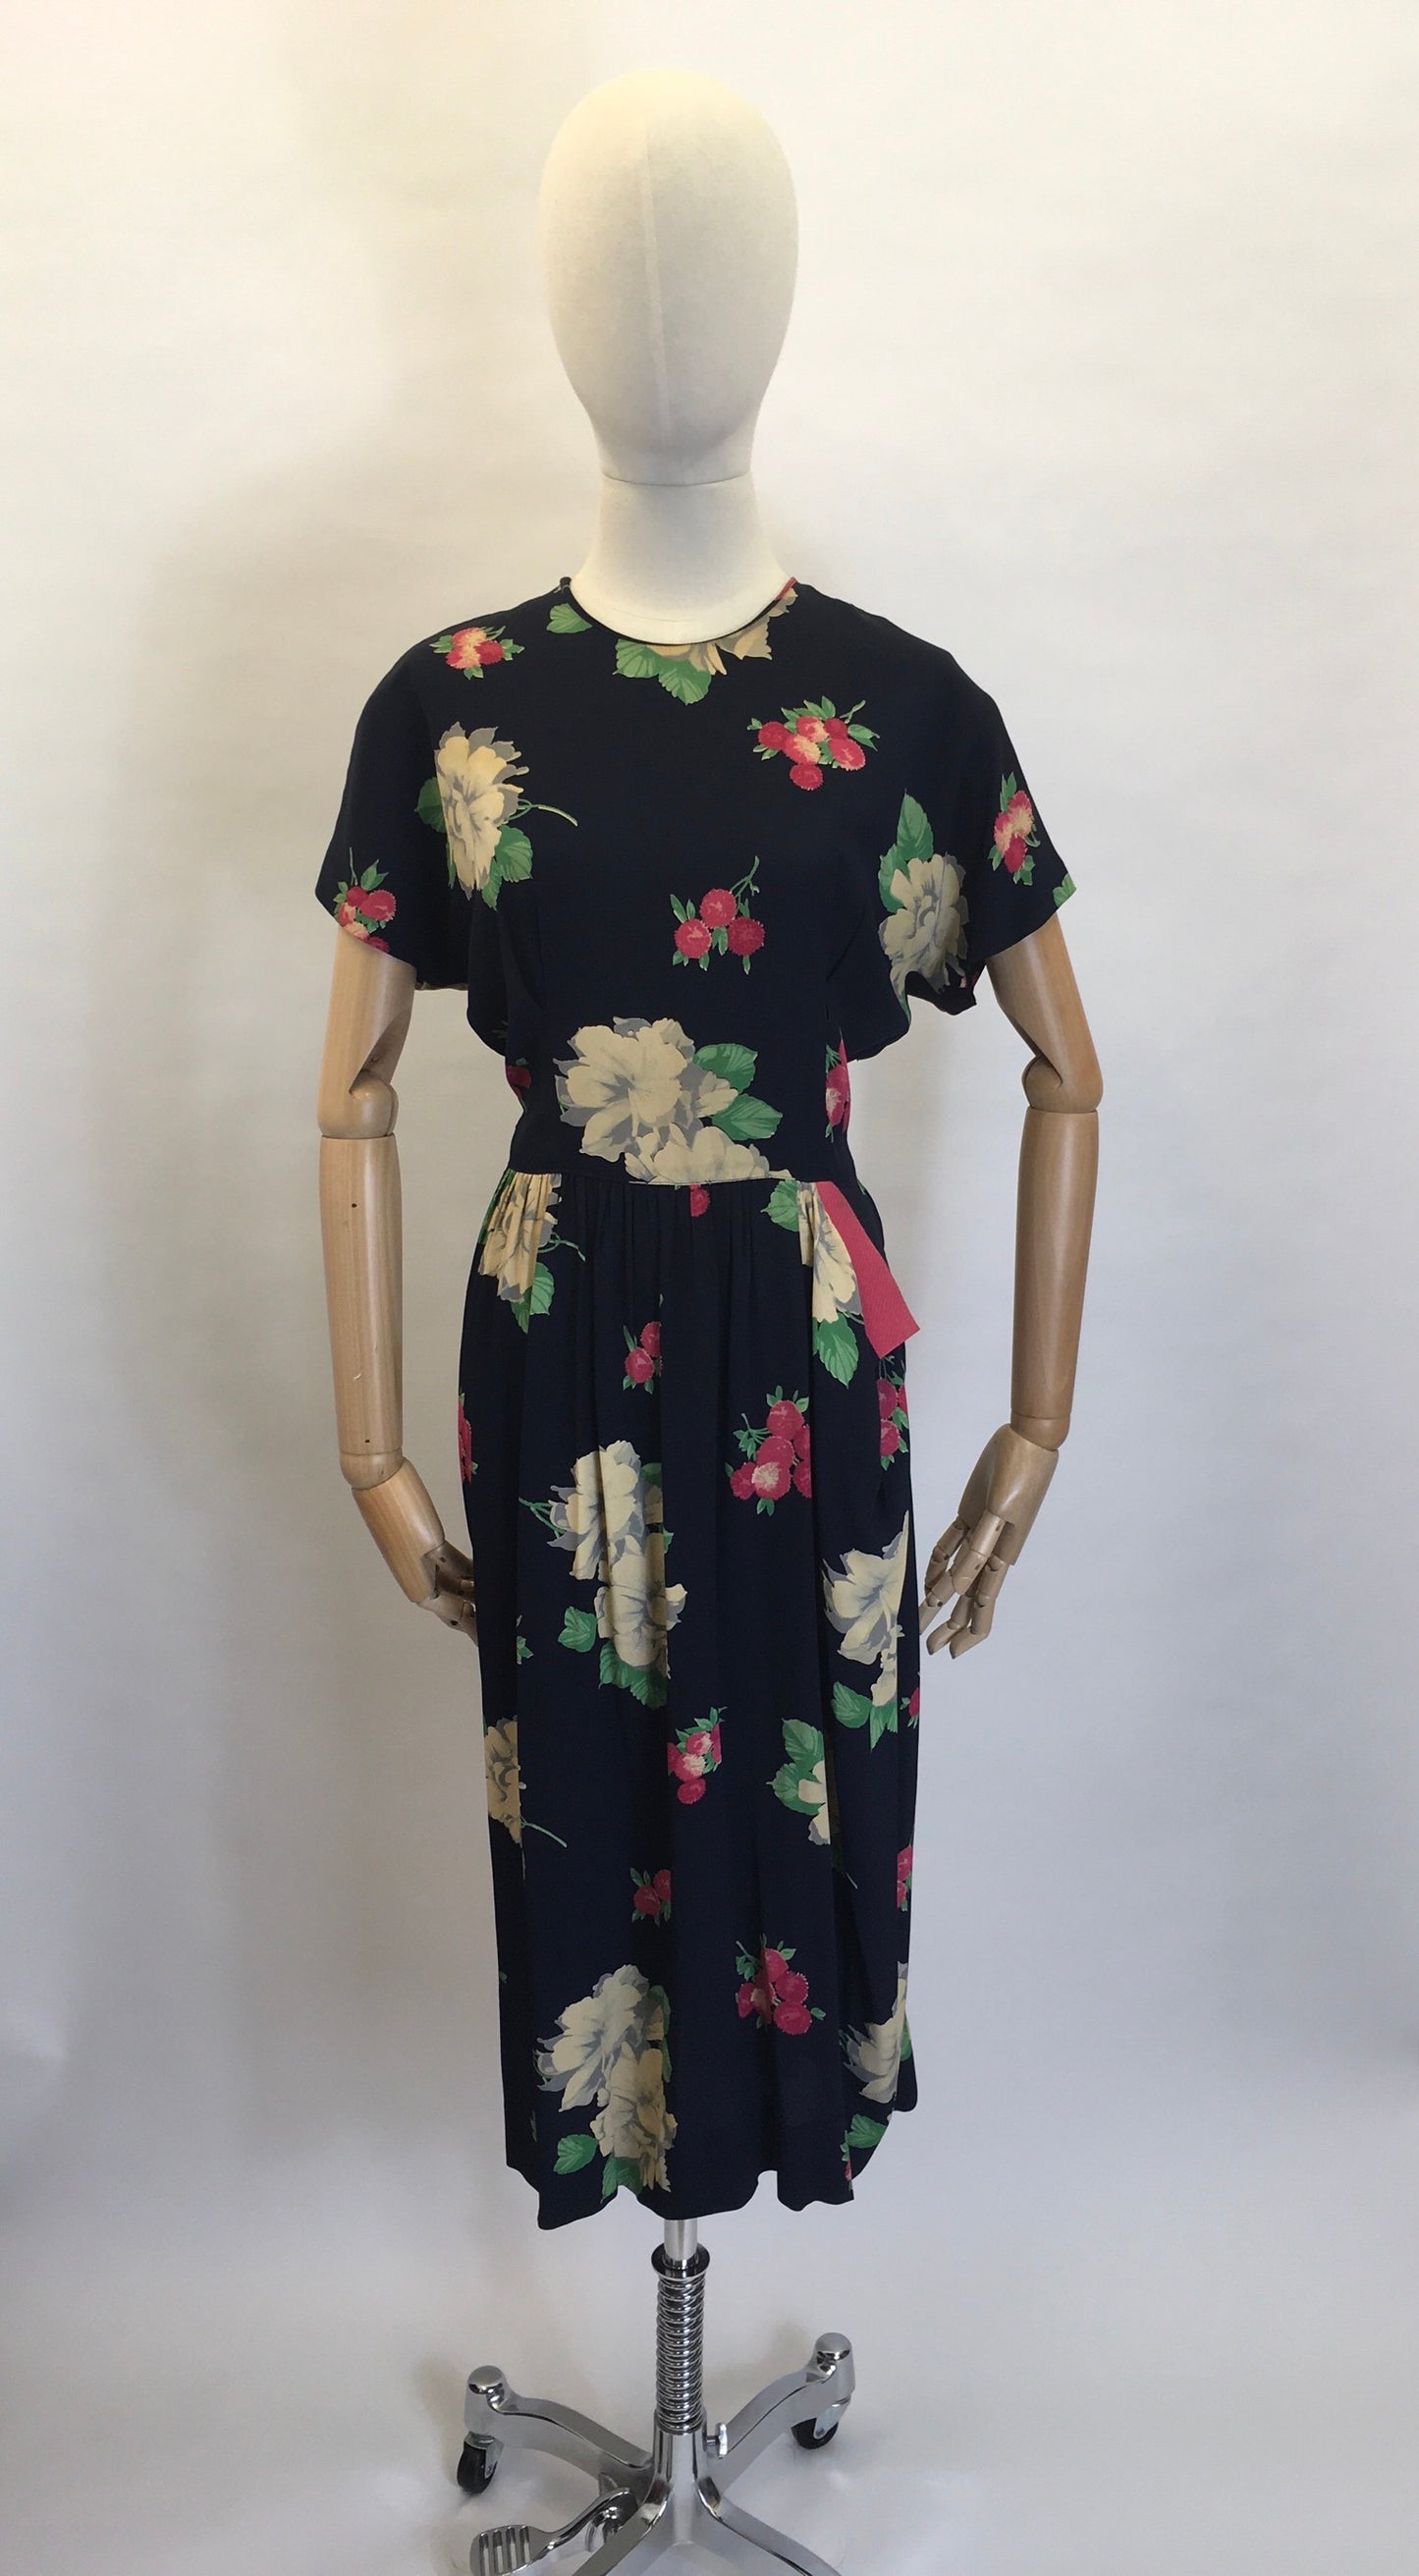 Original 1940's Stunning Floral Rayon Dress - Darling Whimsical Colour Pallet